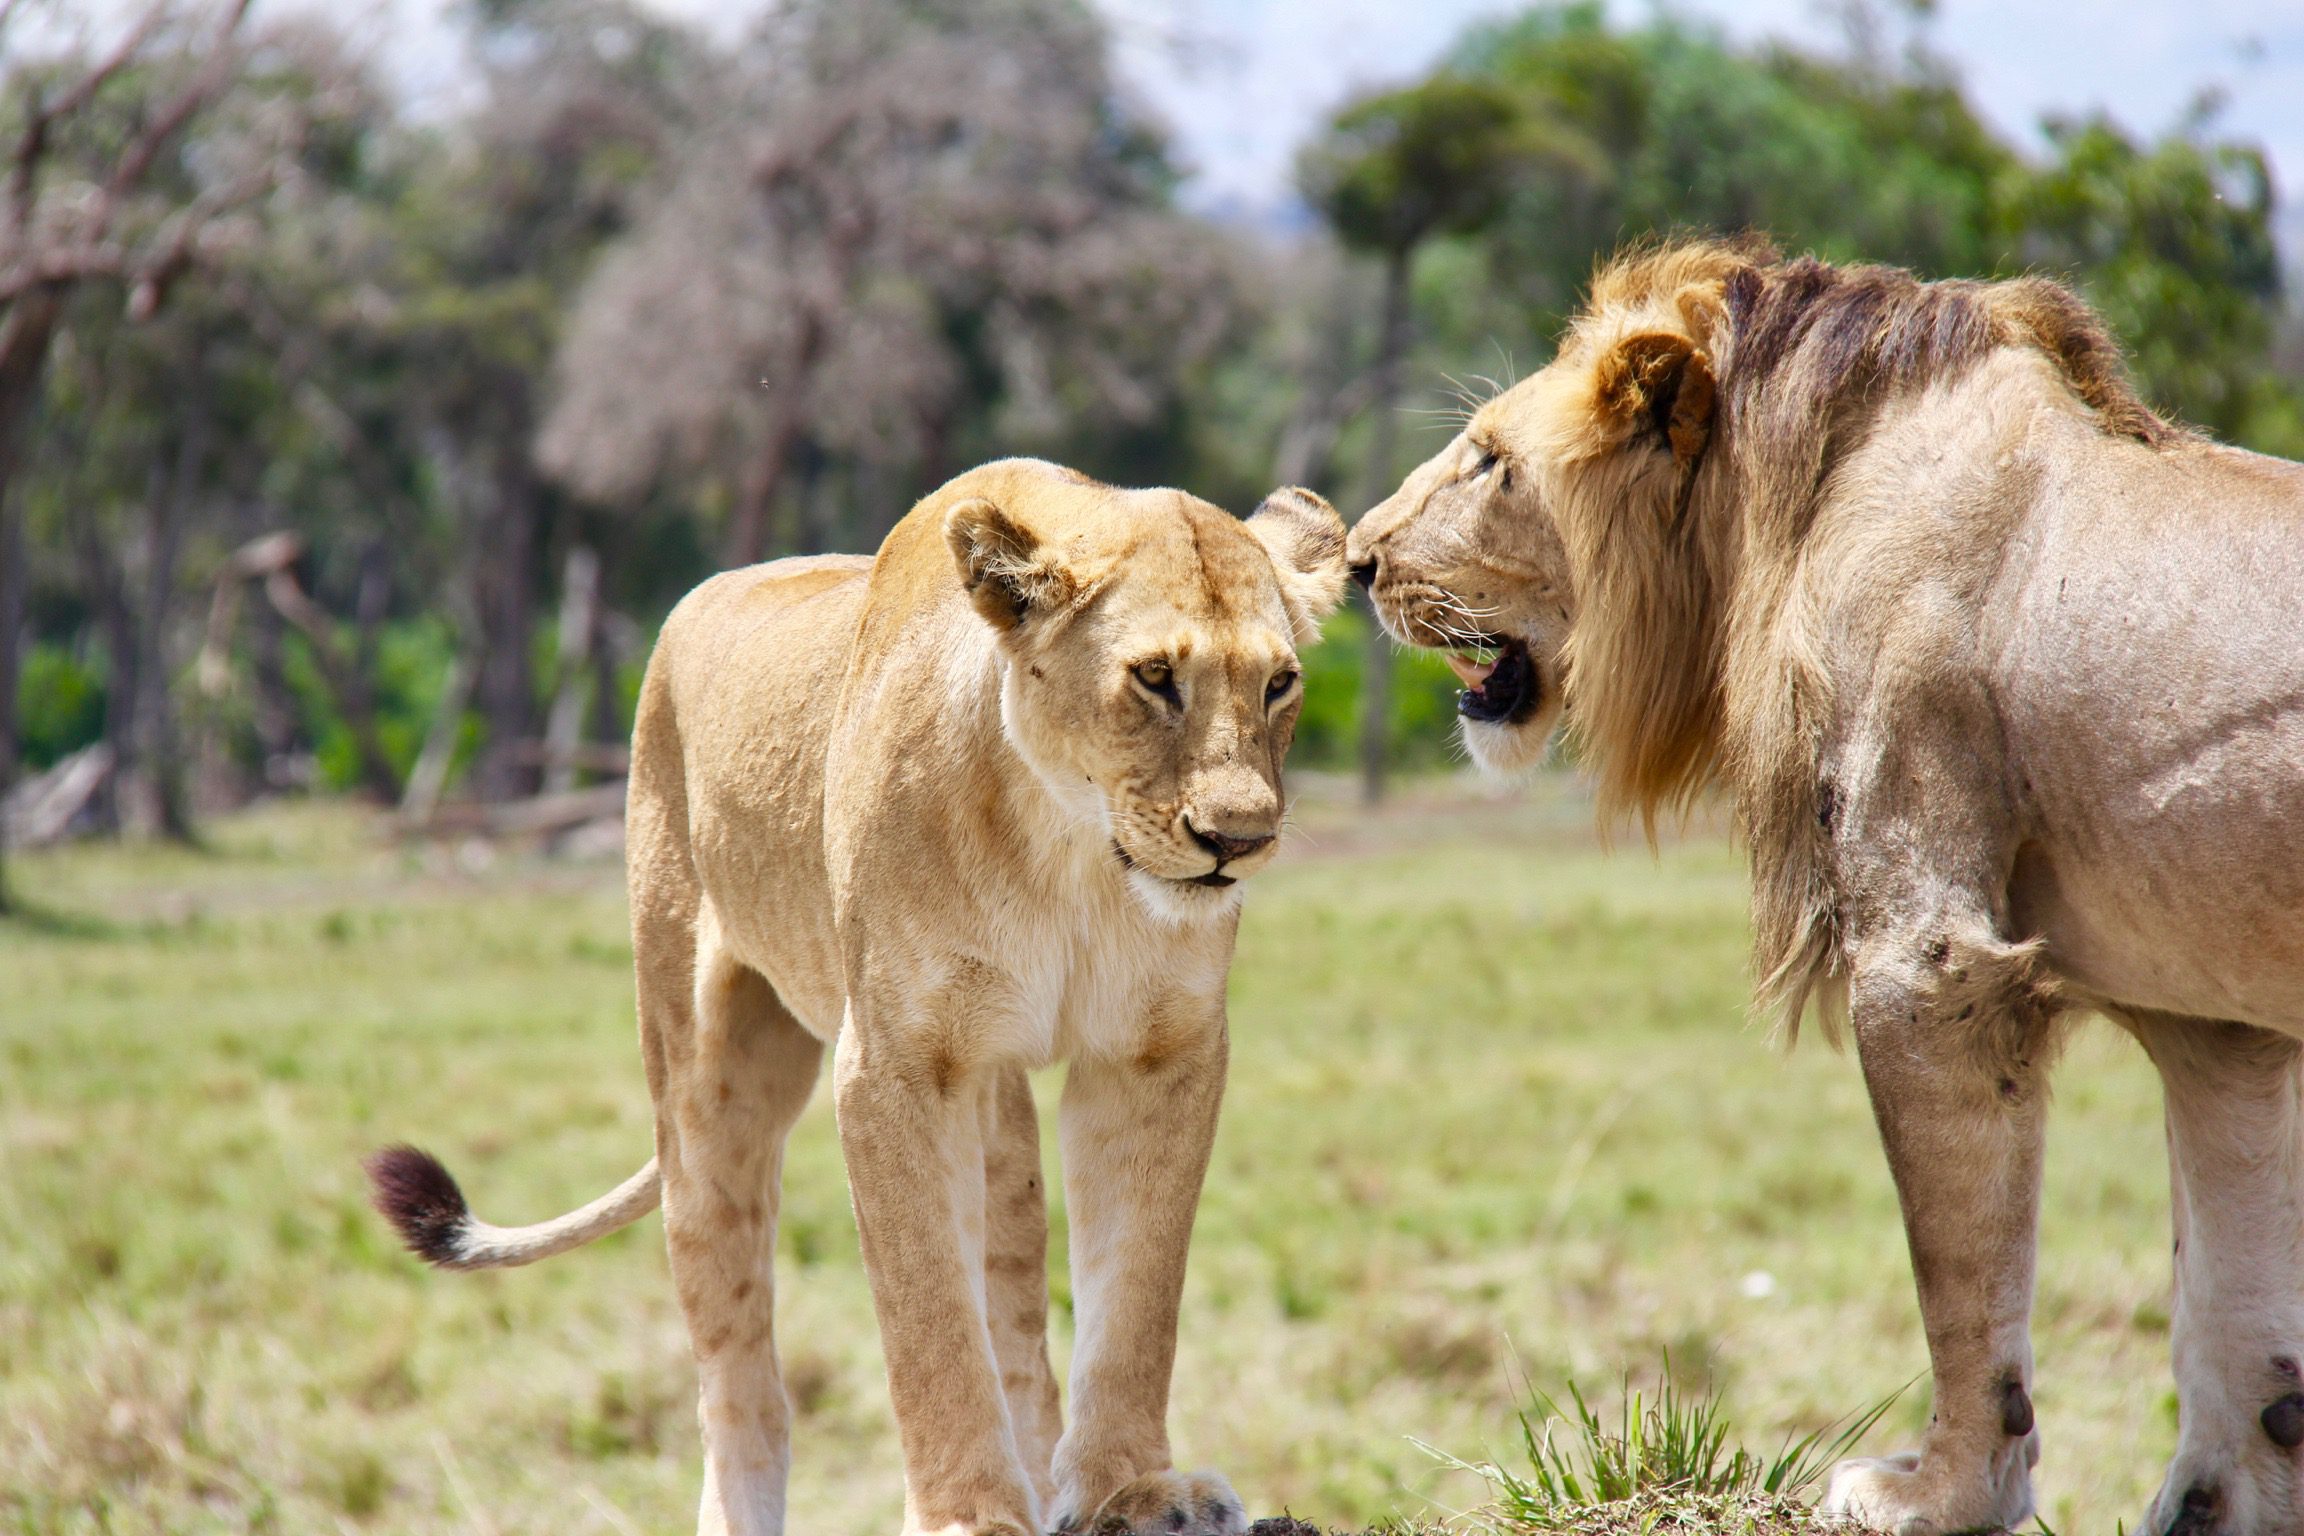 4 favorite activities in Kenya, a lioness approaches a male lion in an open field with trees at the fringe